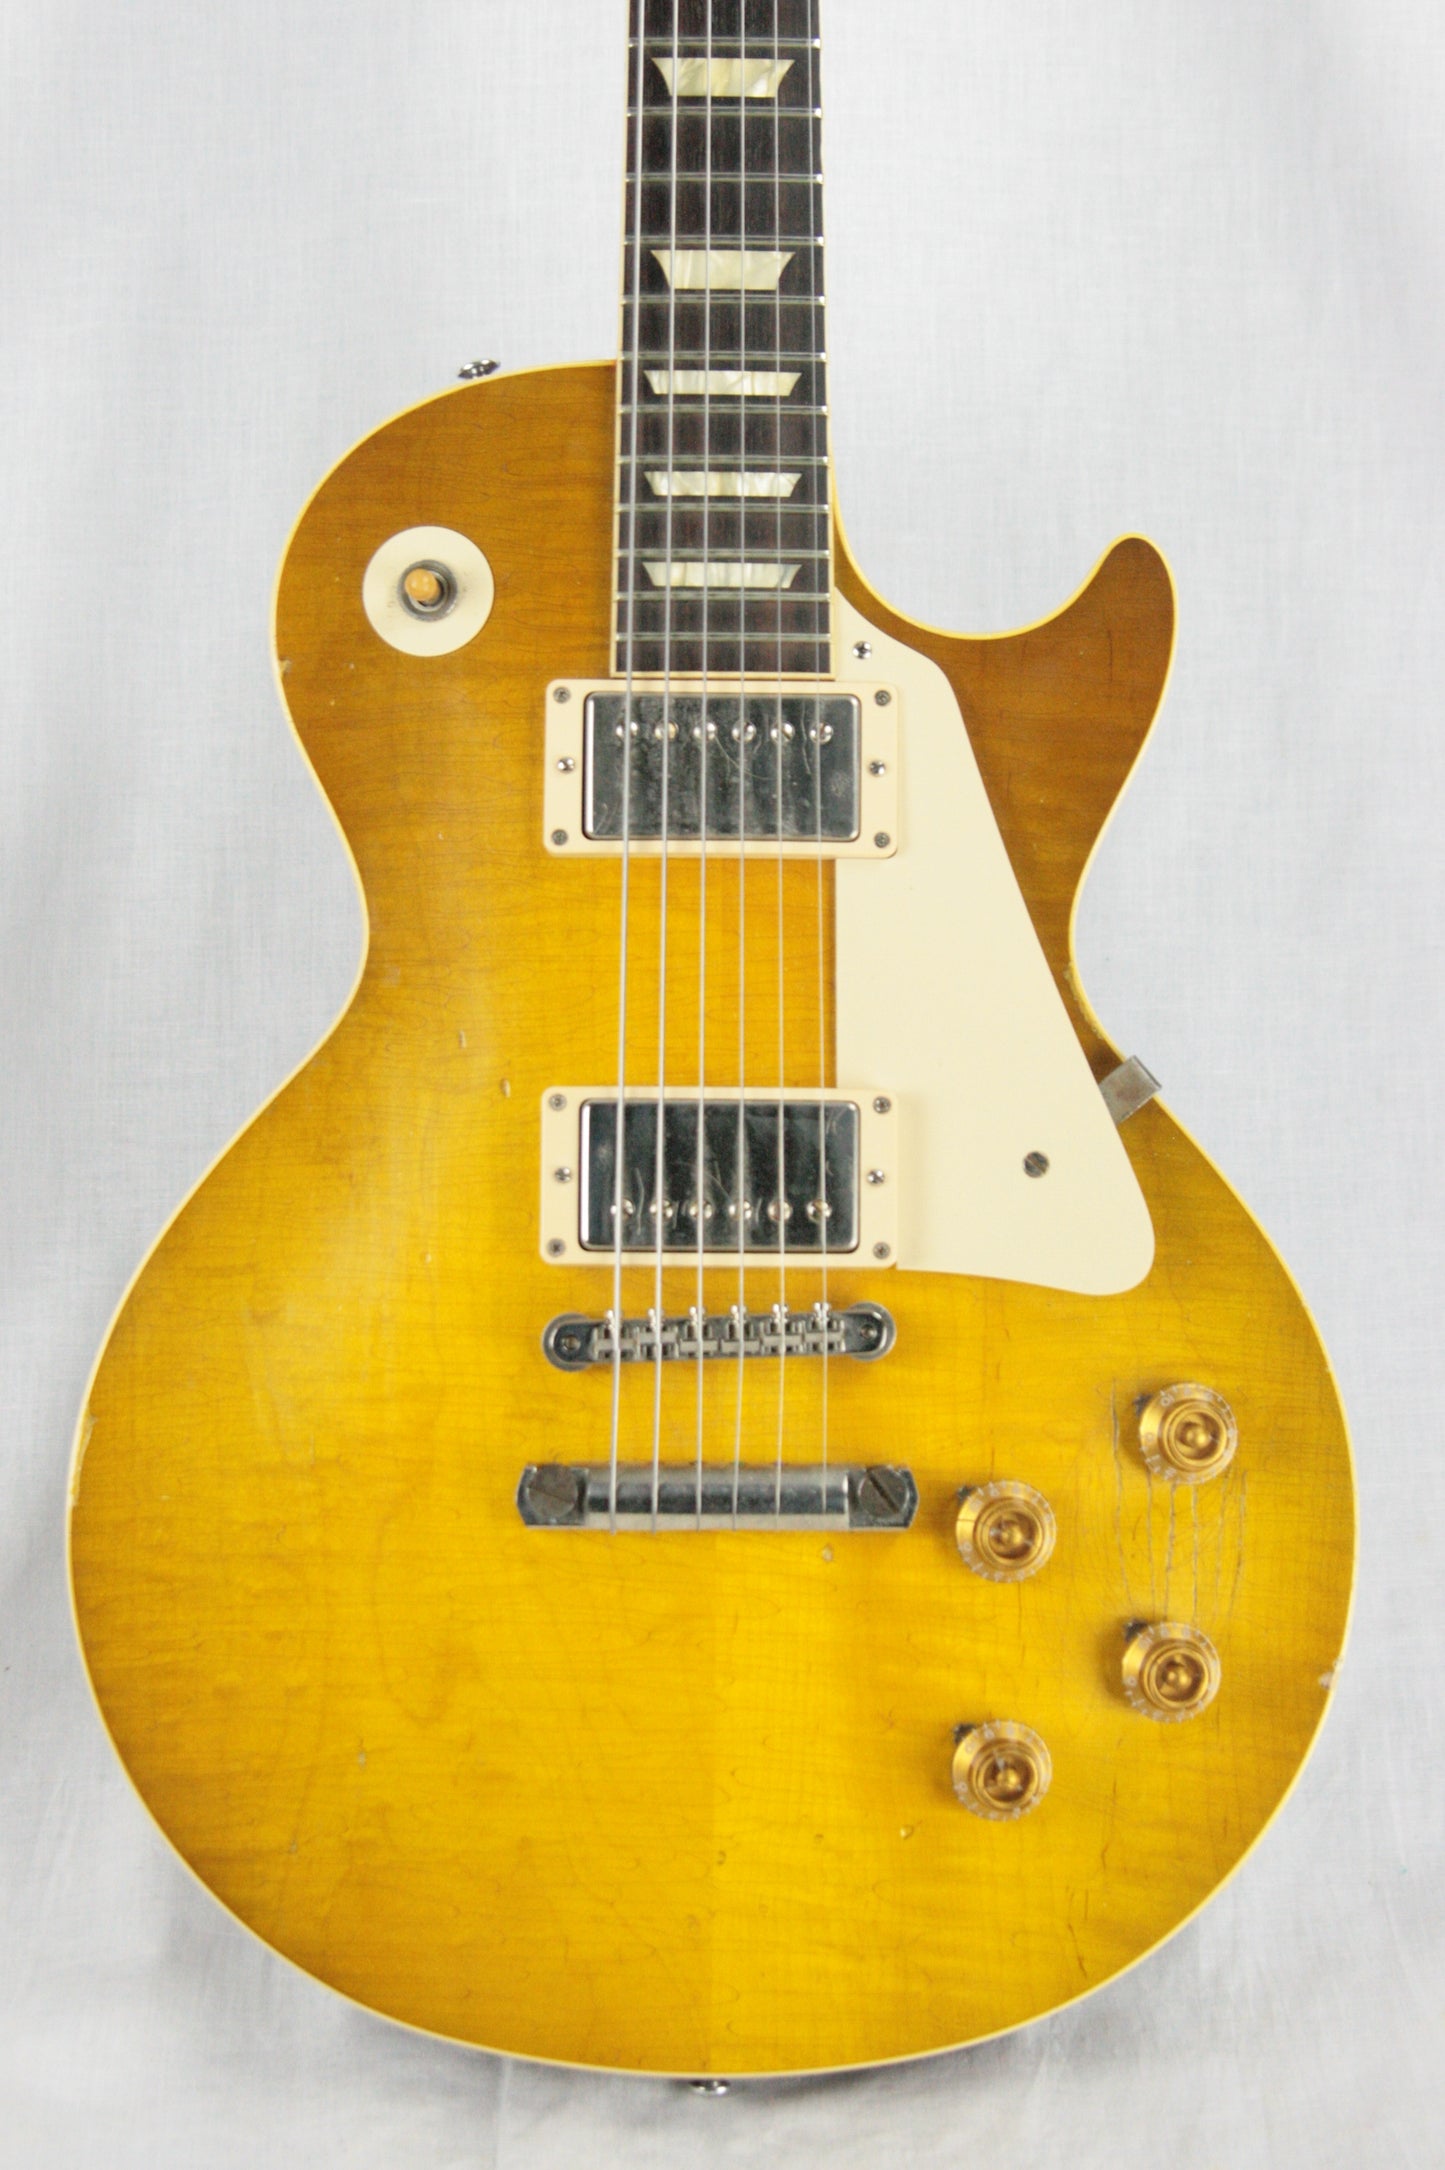 1959 Gibson Les Paul Collector's Choice CC#13 Spoonful Burst Murphy Aged R9 59 Reissue